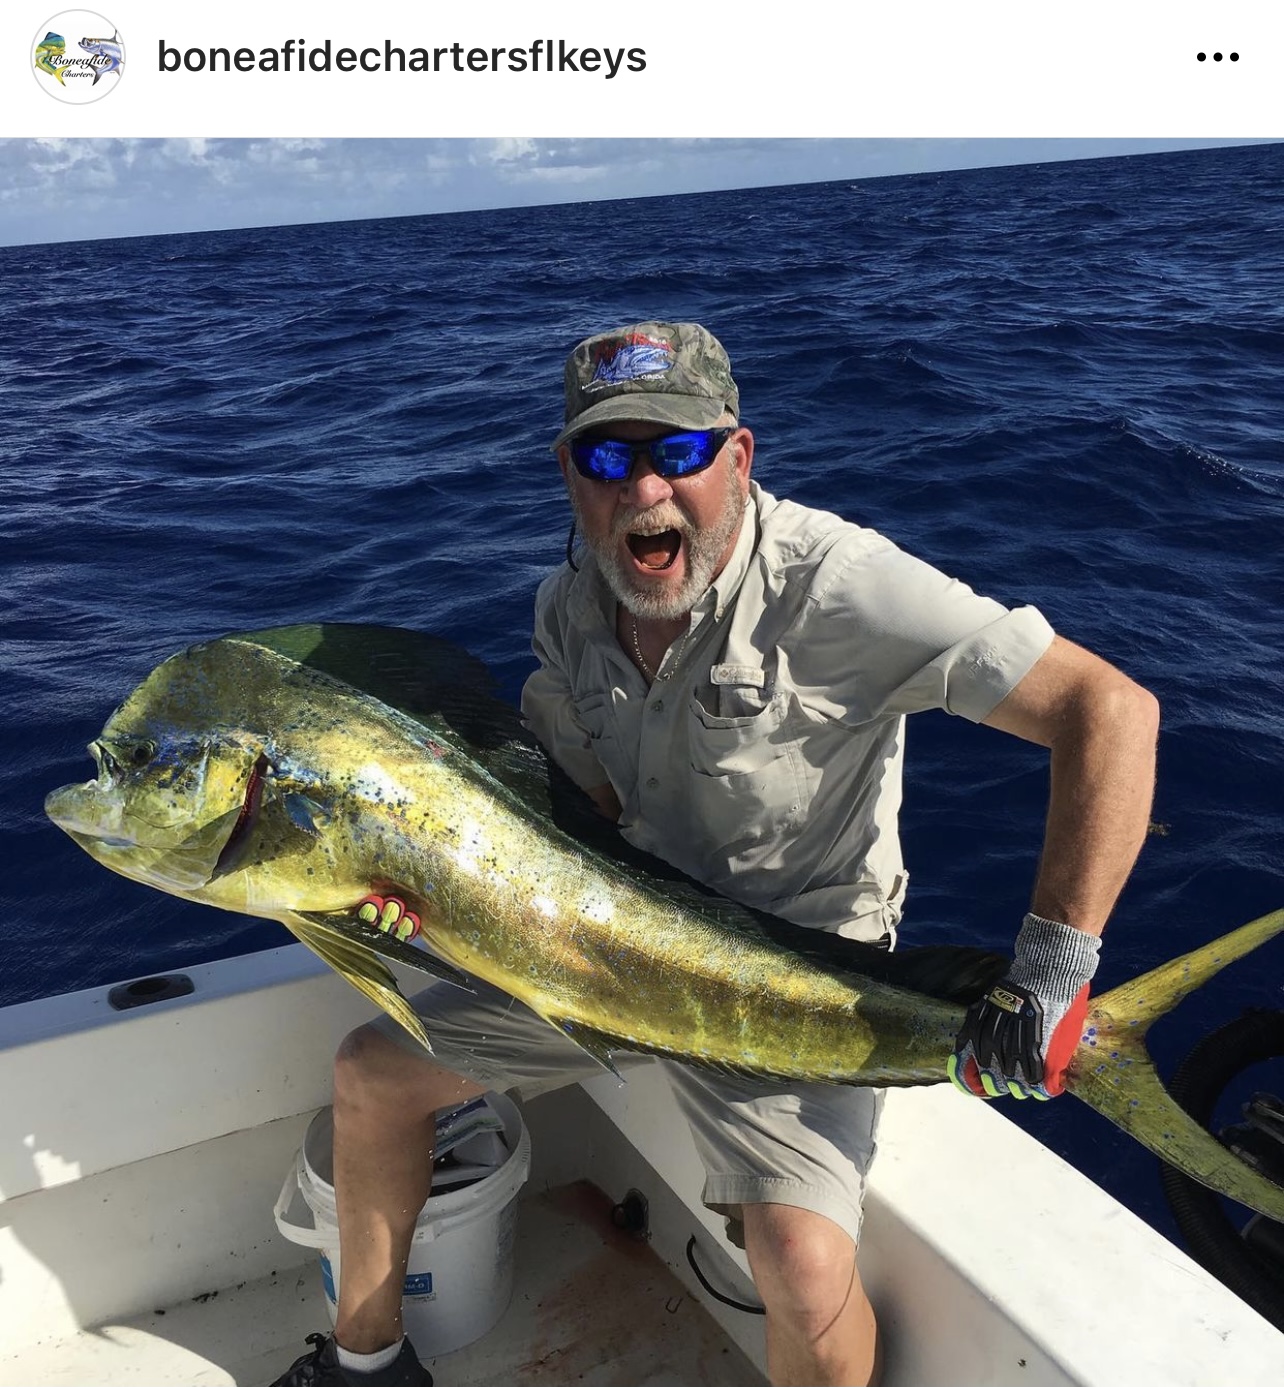 Year Round Fishing and Fun in the Florida Keys